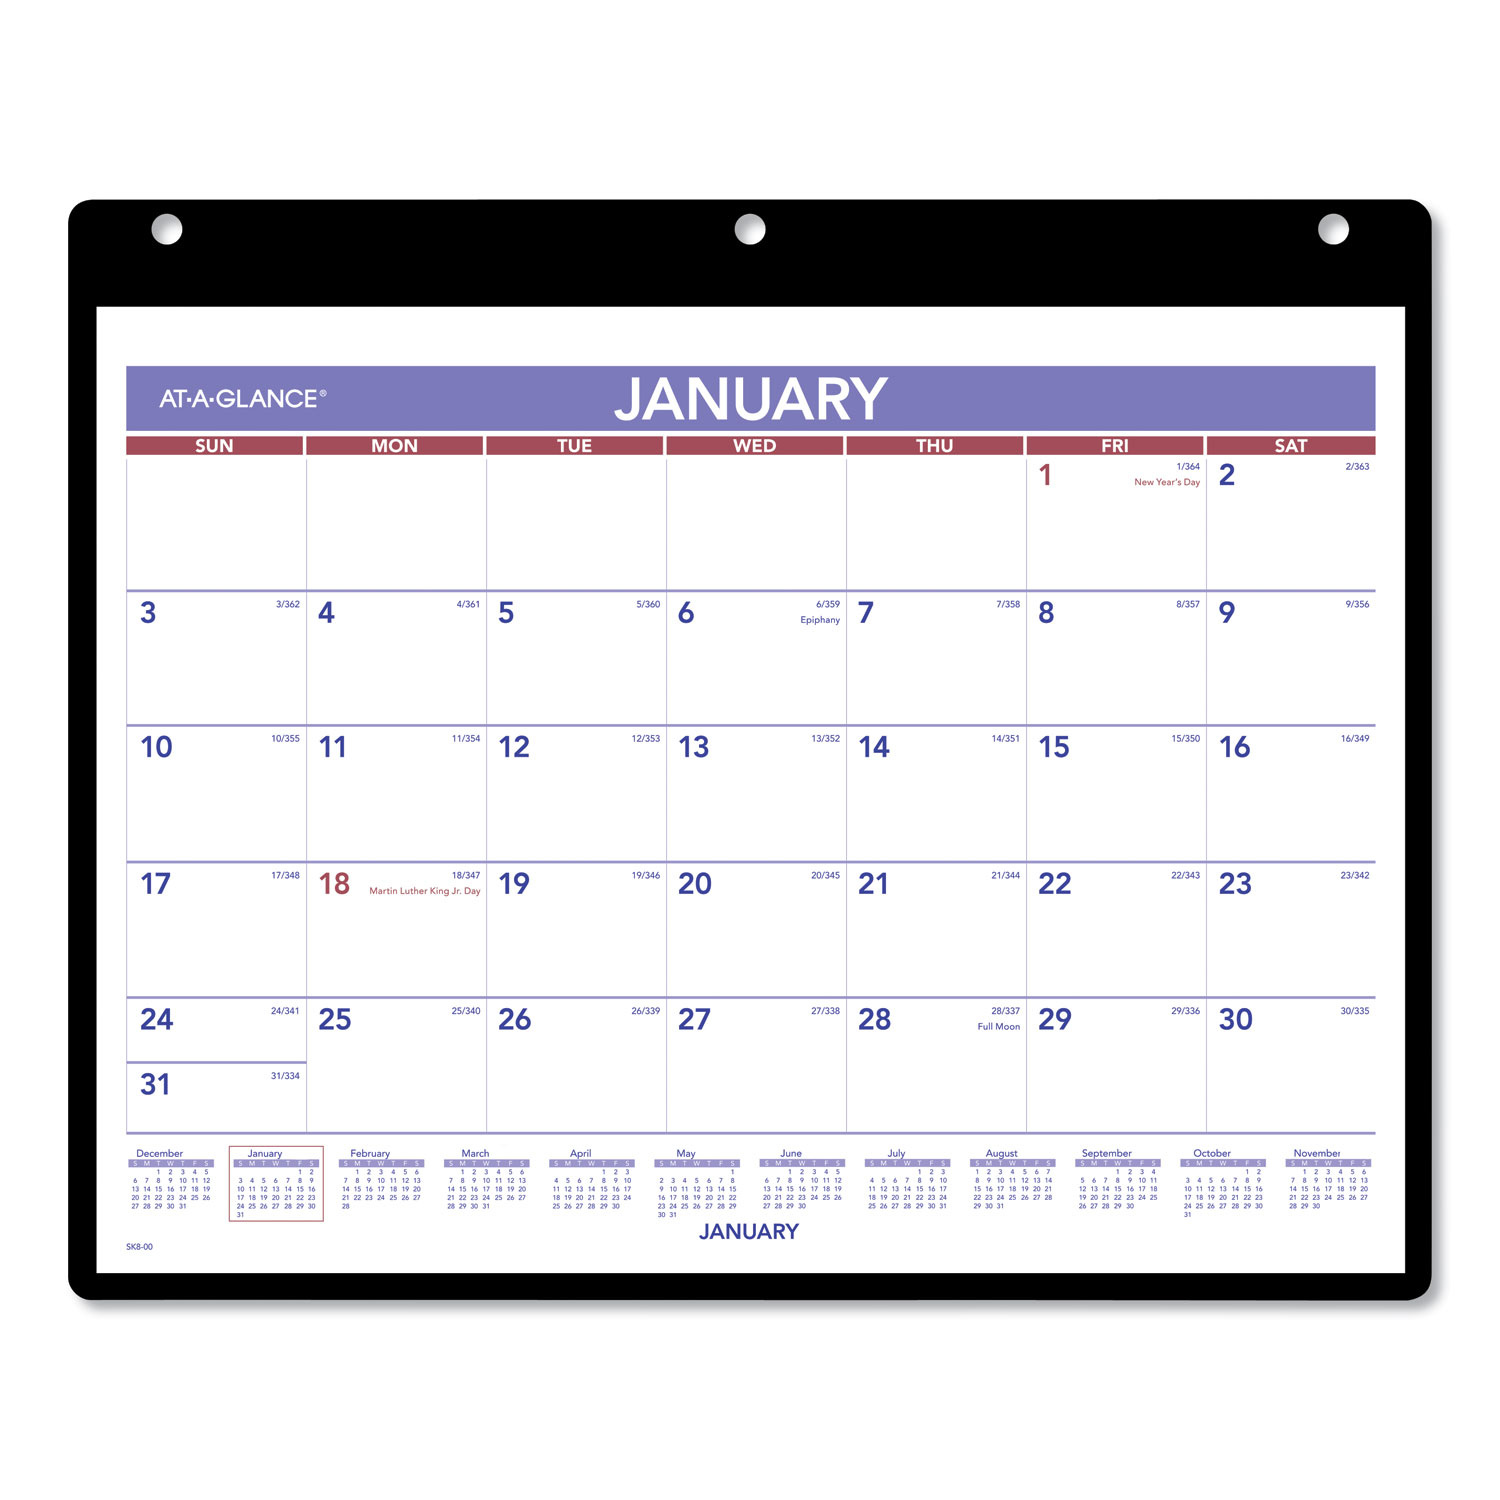 Døds kæbe Kridt morgenmad Monthly Desk/Wall Calendar with Plastic Backboard and Bonus Pages, 11 x 8,  White/Violet/Red Sheets, 12-Month (Jan-Dec): 2024 - Office Express Office  Products